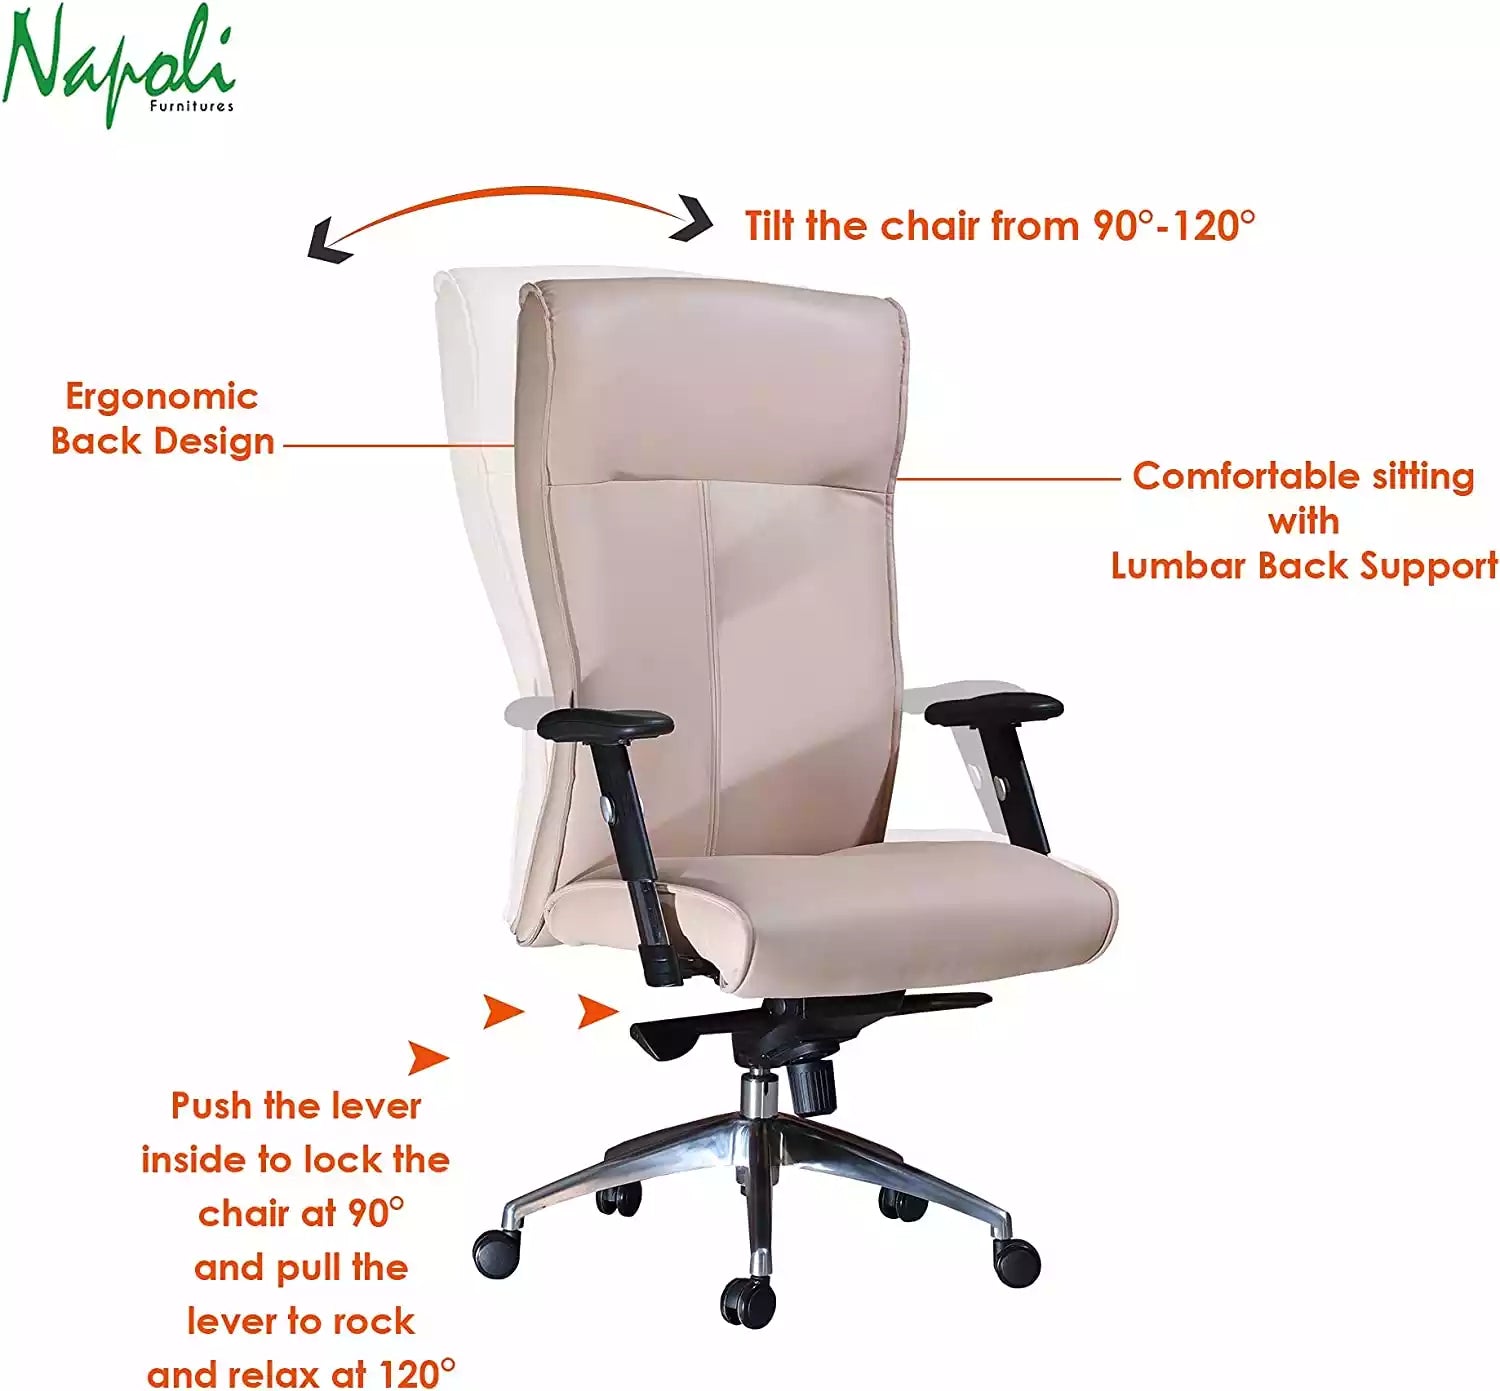 Office Chair with Adjustable Height and Lumbar Support, Beige Color